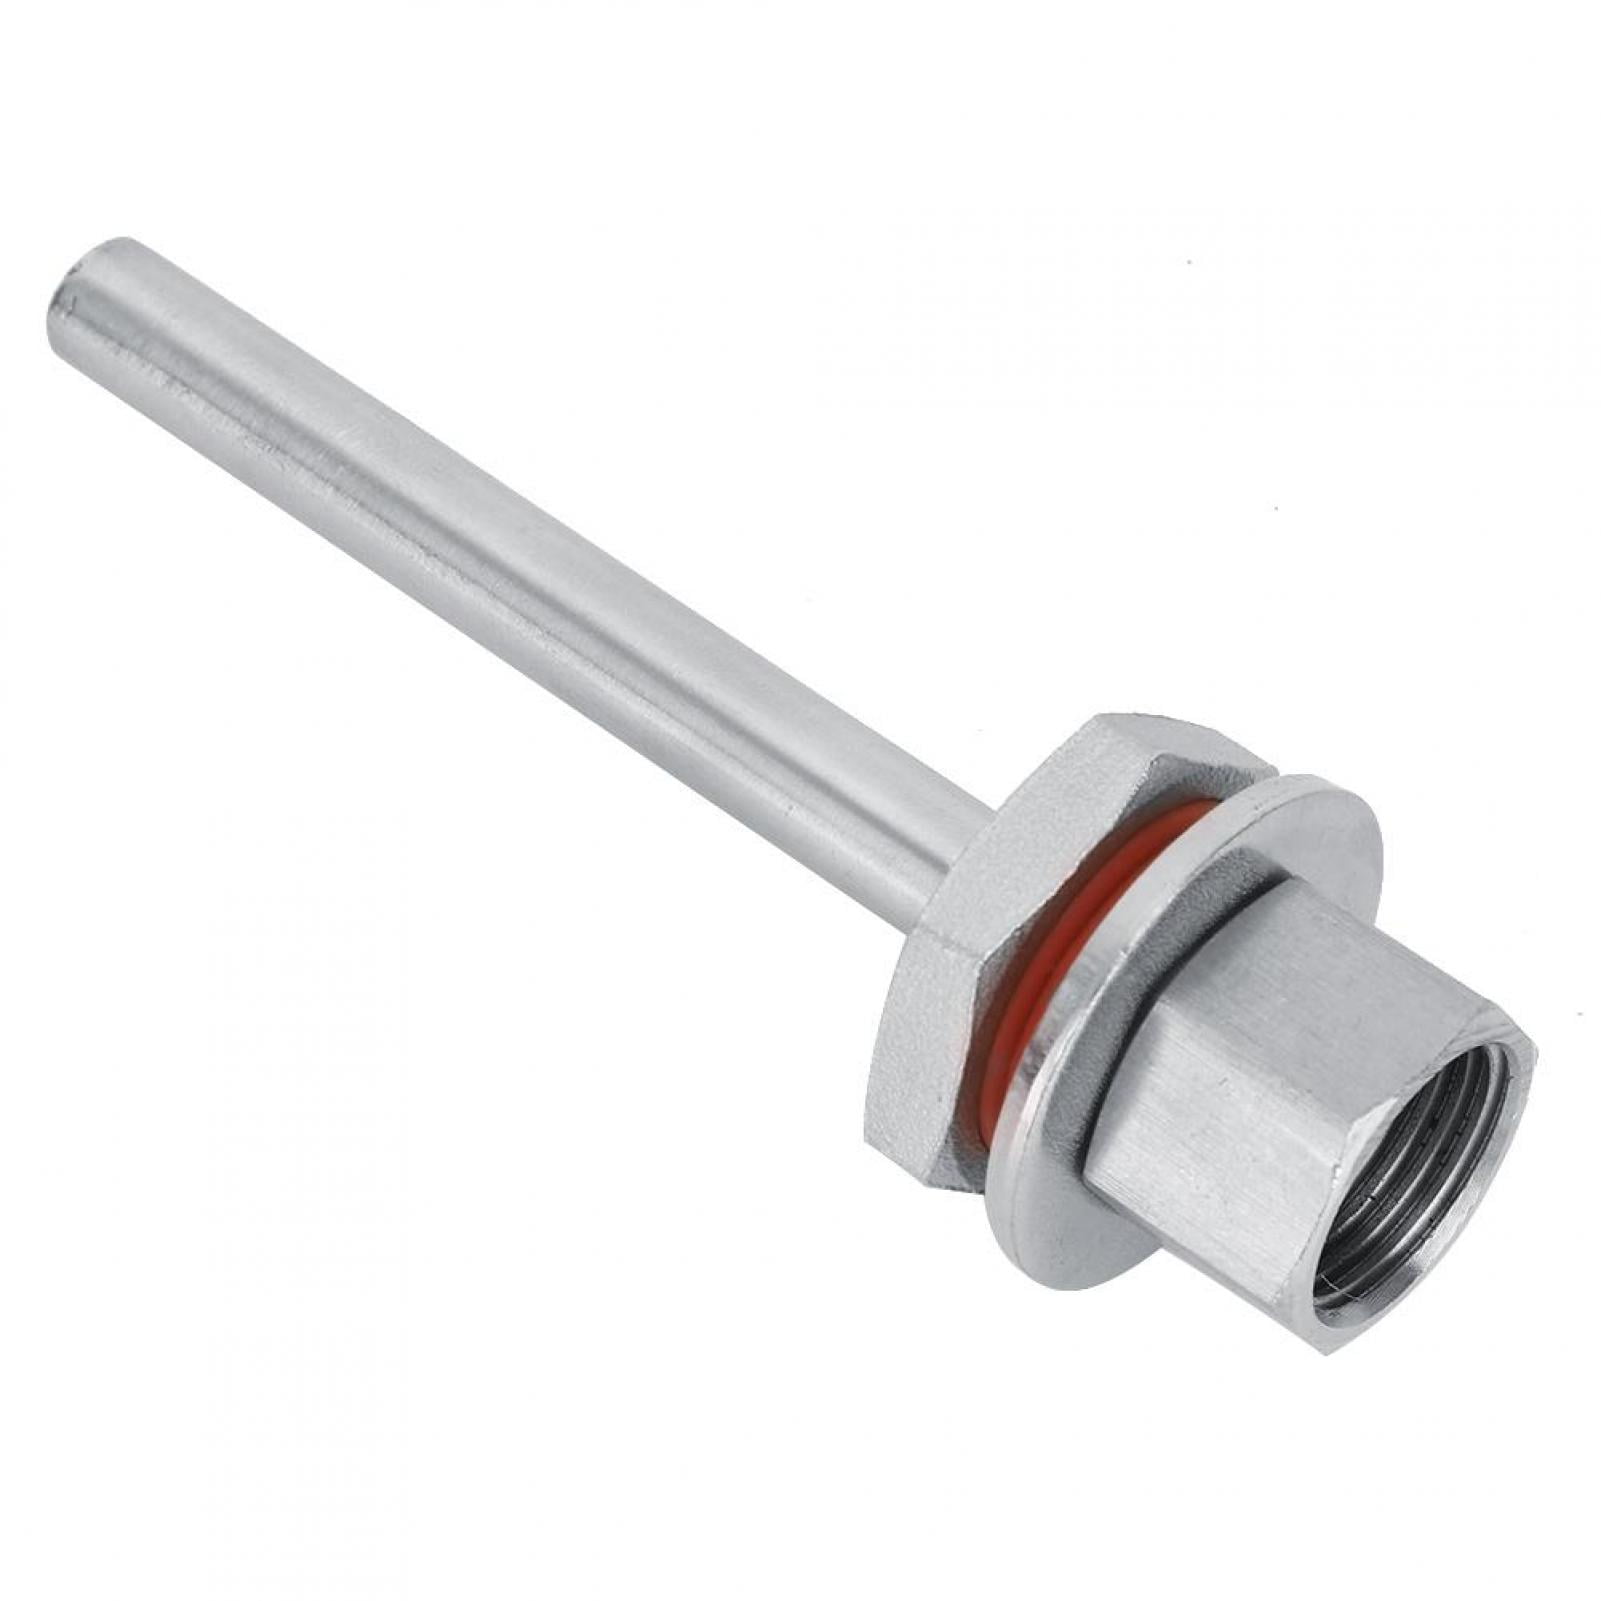 4 Inch Stainless Steel 1/2in Thermowell Kit Fast Ferment Thermometer Stainless Steel Thermometer Homebrew Fitting Accessories